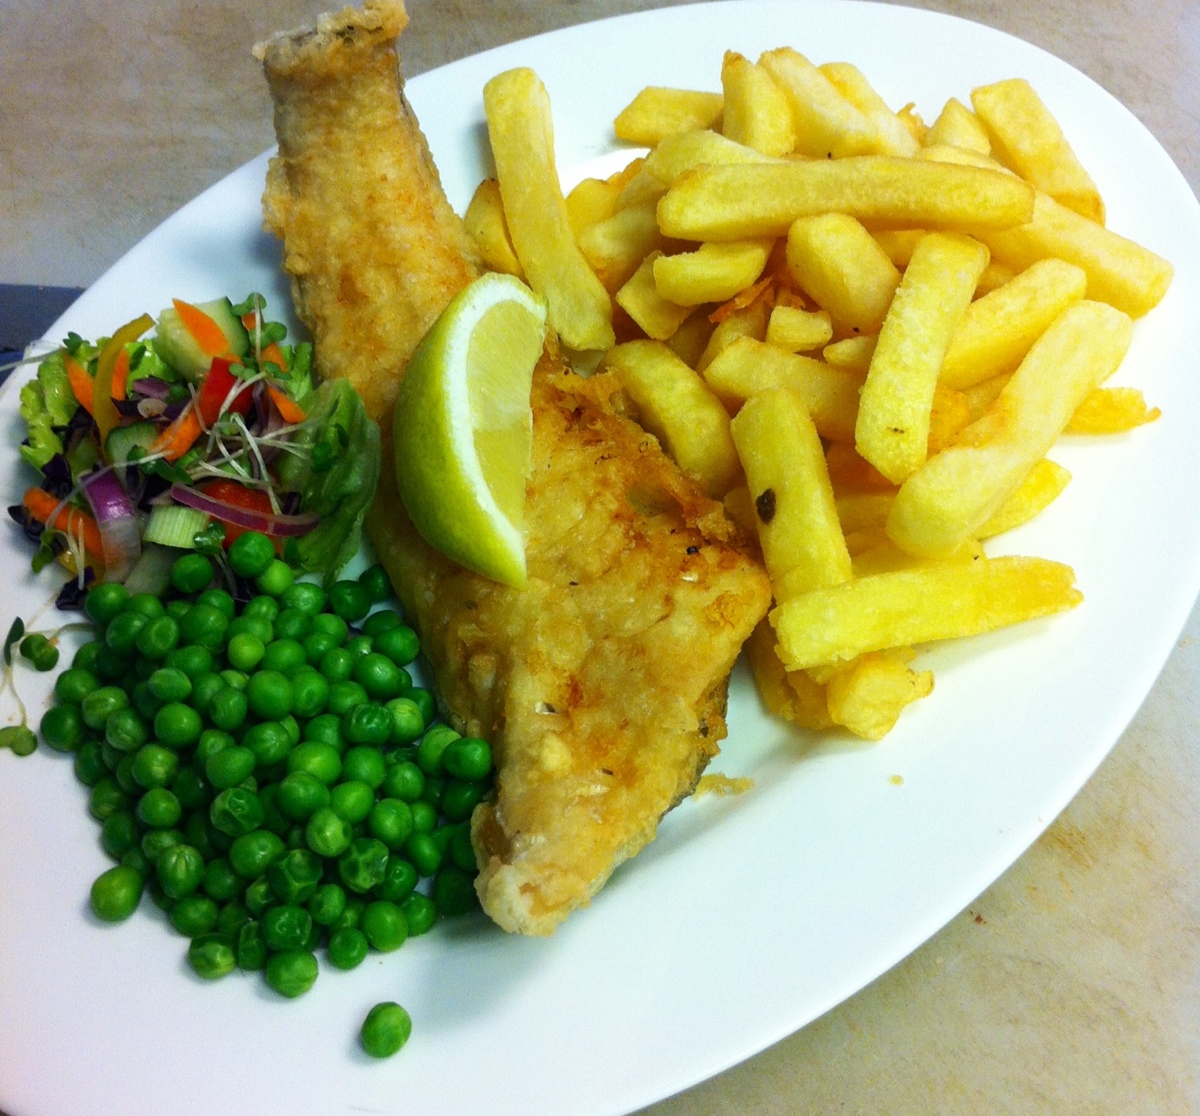 Fresh Cod & Chips in our Homemade Batter